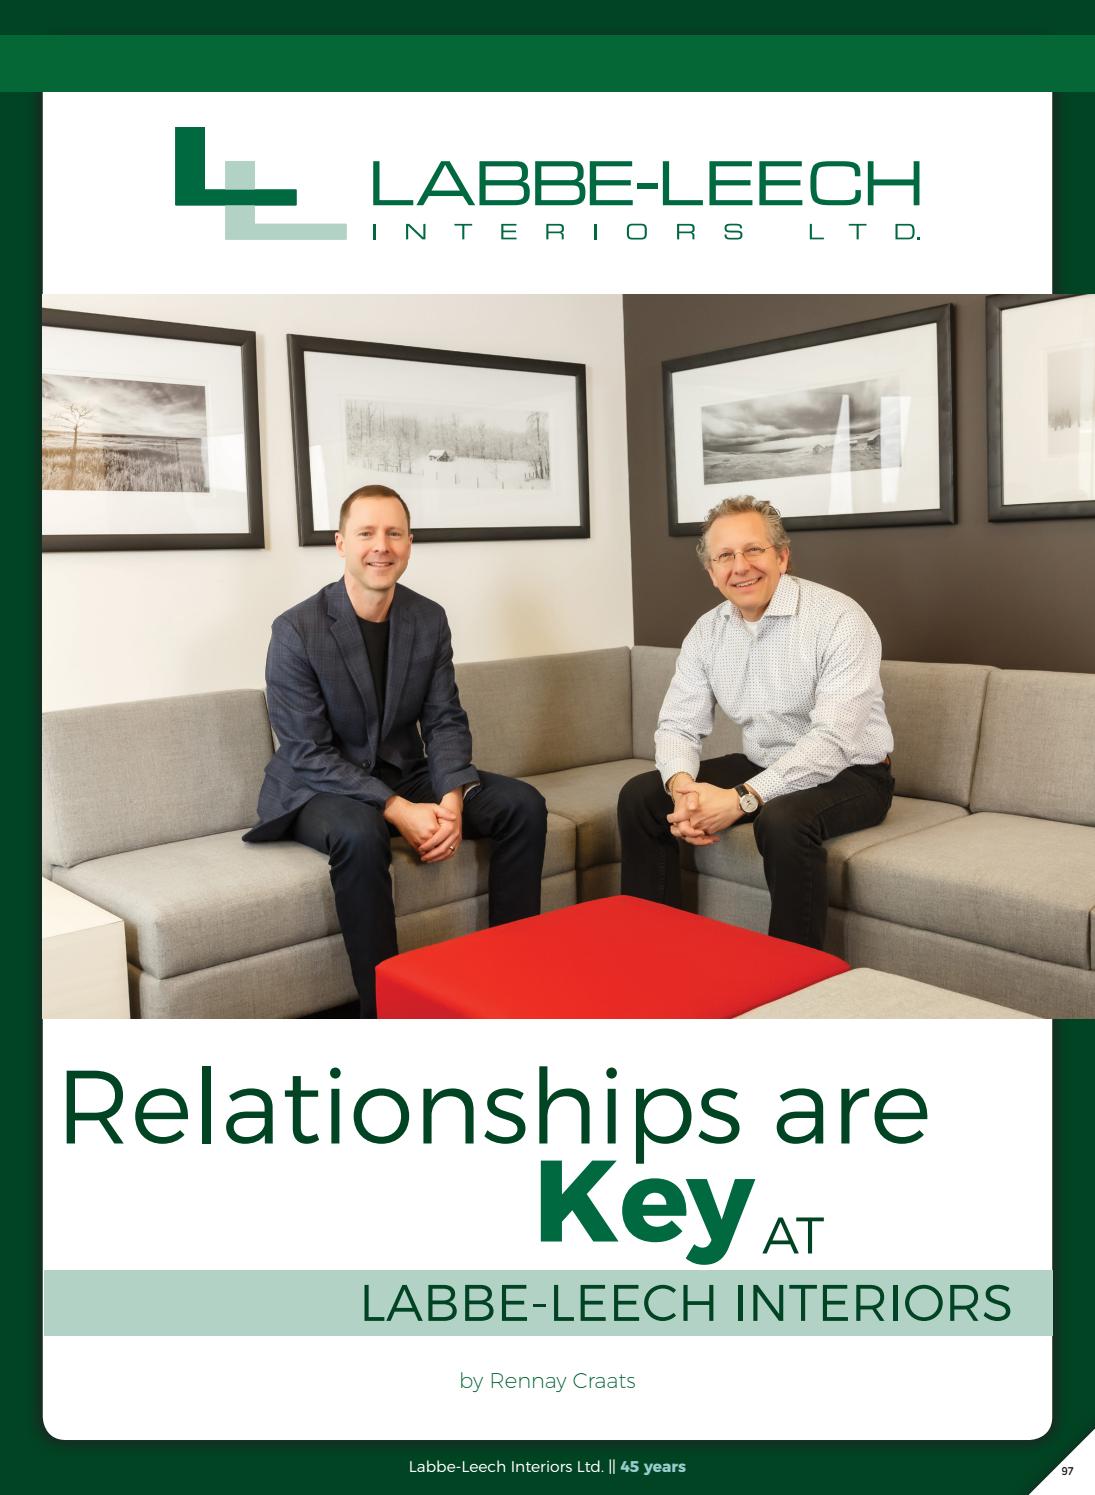 Business in Calgary Magazine - Business Profile for Labbe-Leech Interiors